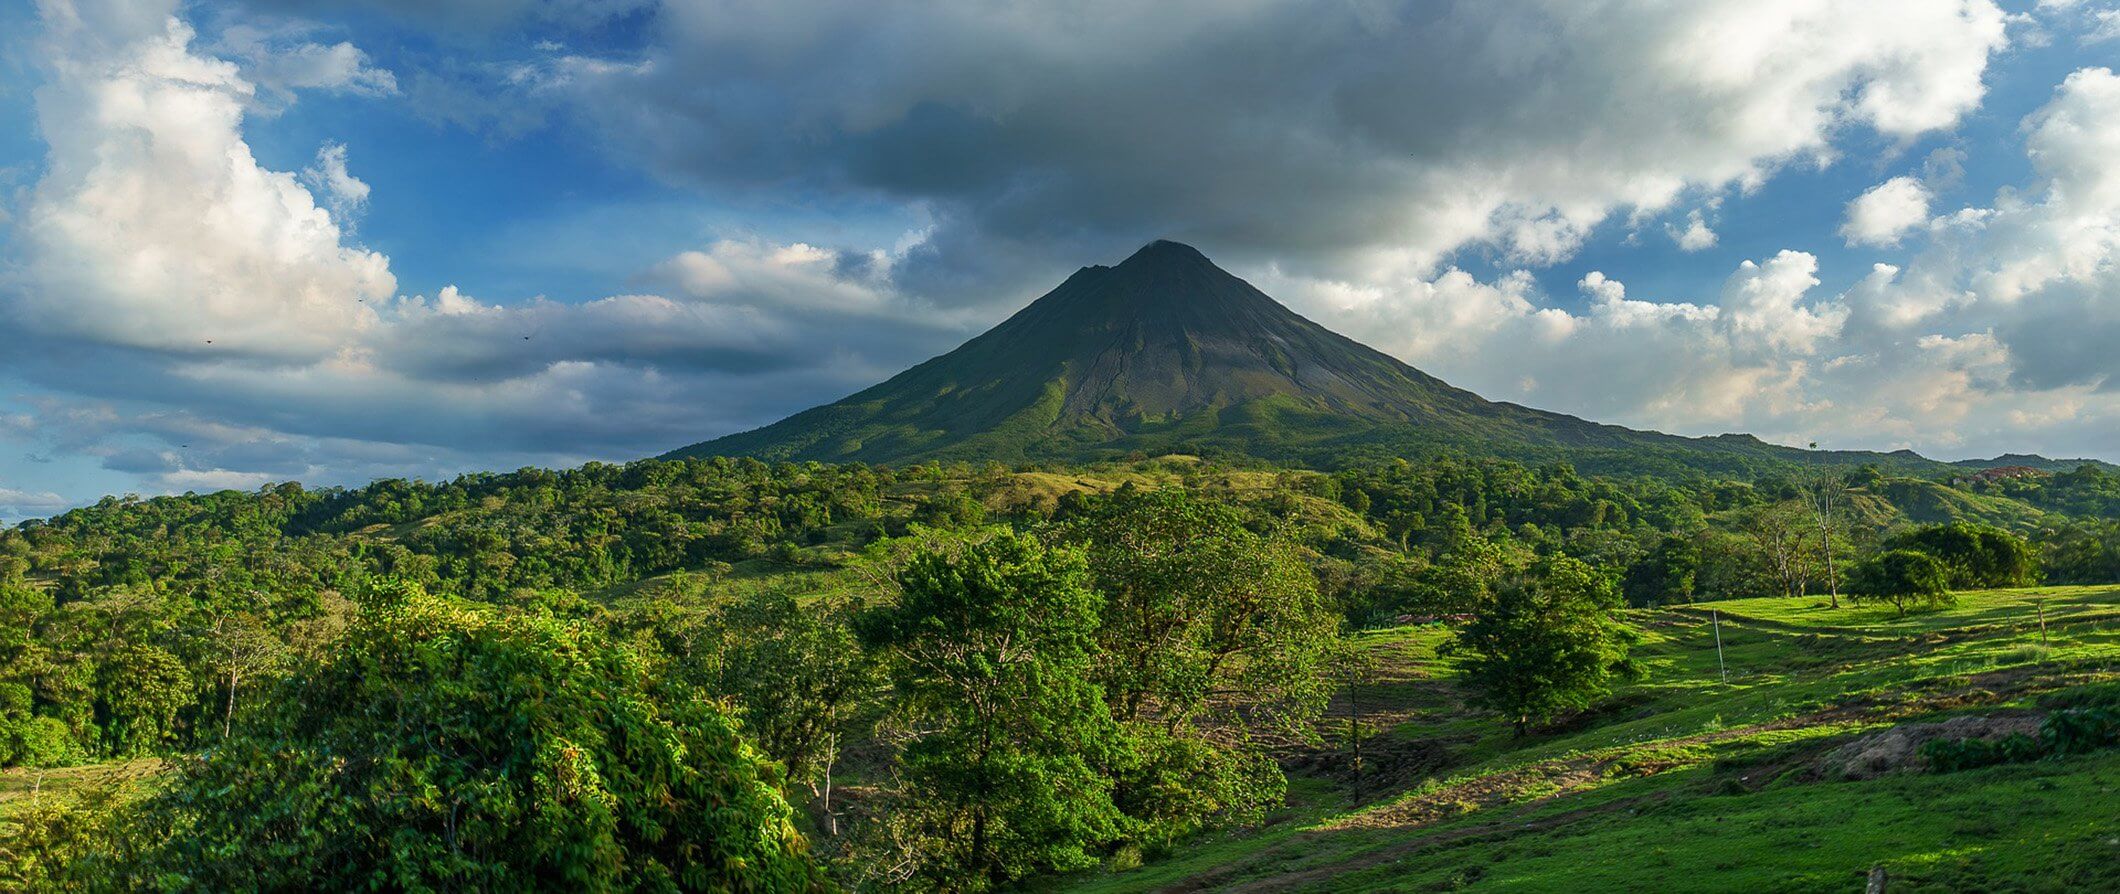 Arenal Volcano in Costa Rica. Surrounded by Jungle with clouds forming just above the Volcano